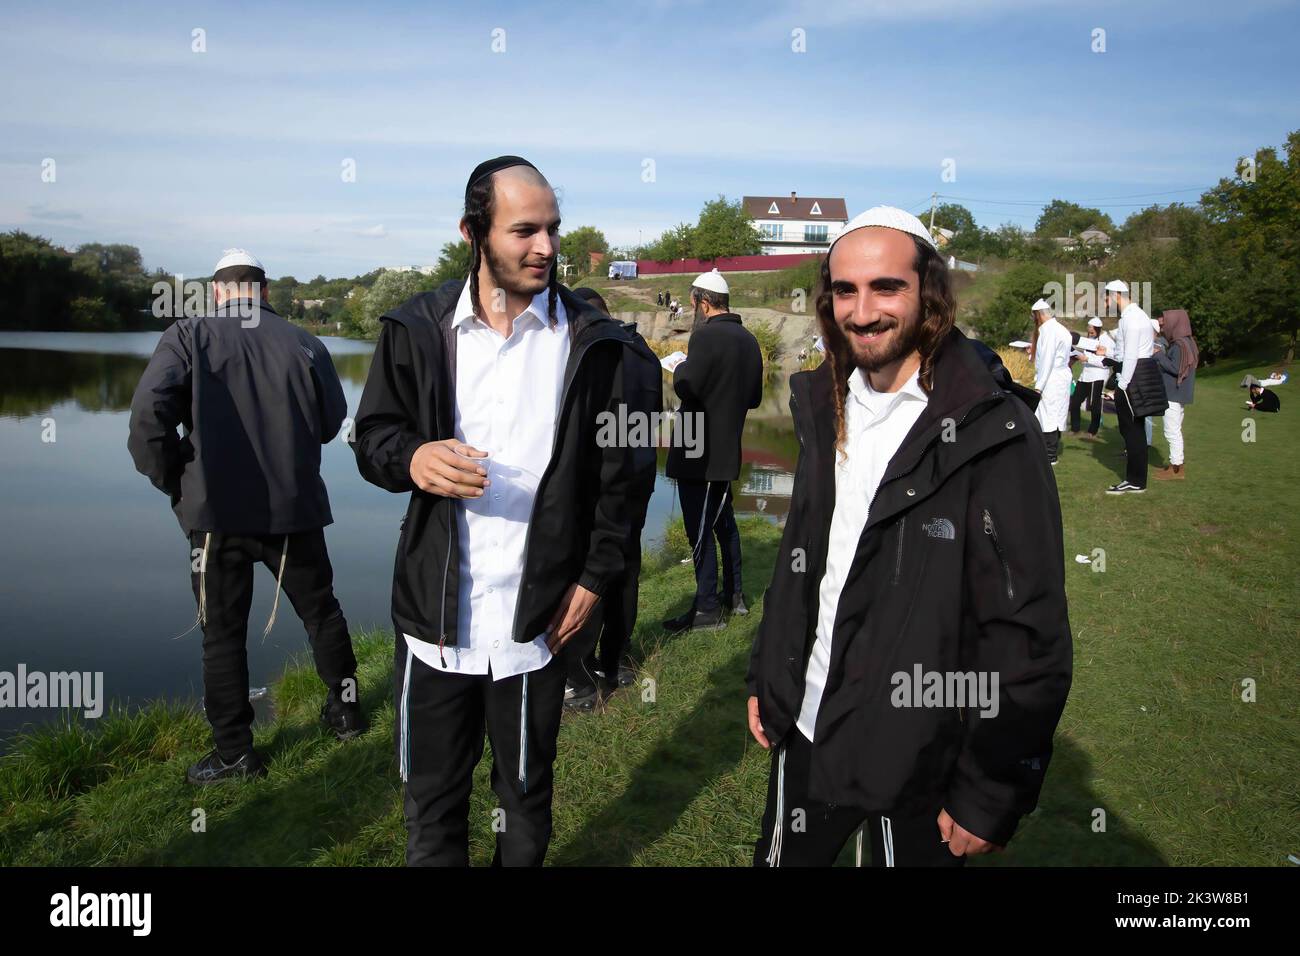 Uman, Ukraine. 26th Sep, 2022. Ultra-Orthodox Jewish pilgrims are seen during the celebration. Every year, thousands of Orthodox Bratslav Hasidic Jews from different countries gather in Uman to mark Rosh Hashanah, Jewish New Year, near the tomb of Rabbi Nachman, a great-grandson of the founder of Hasidism. (Photo by Oleksii Chumachenko/SOPA Image/Sipa USA) Credit: Sipa USA/Alamy Live News Stock Photo